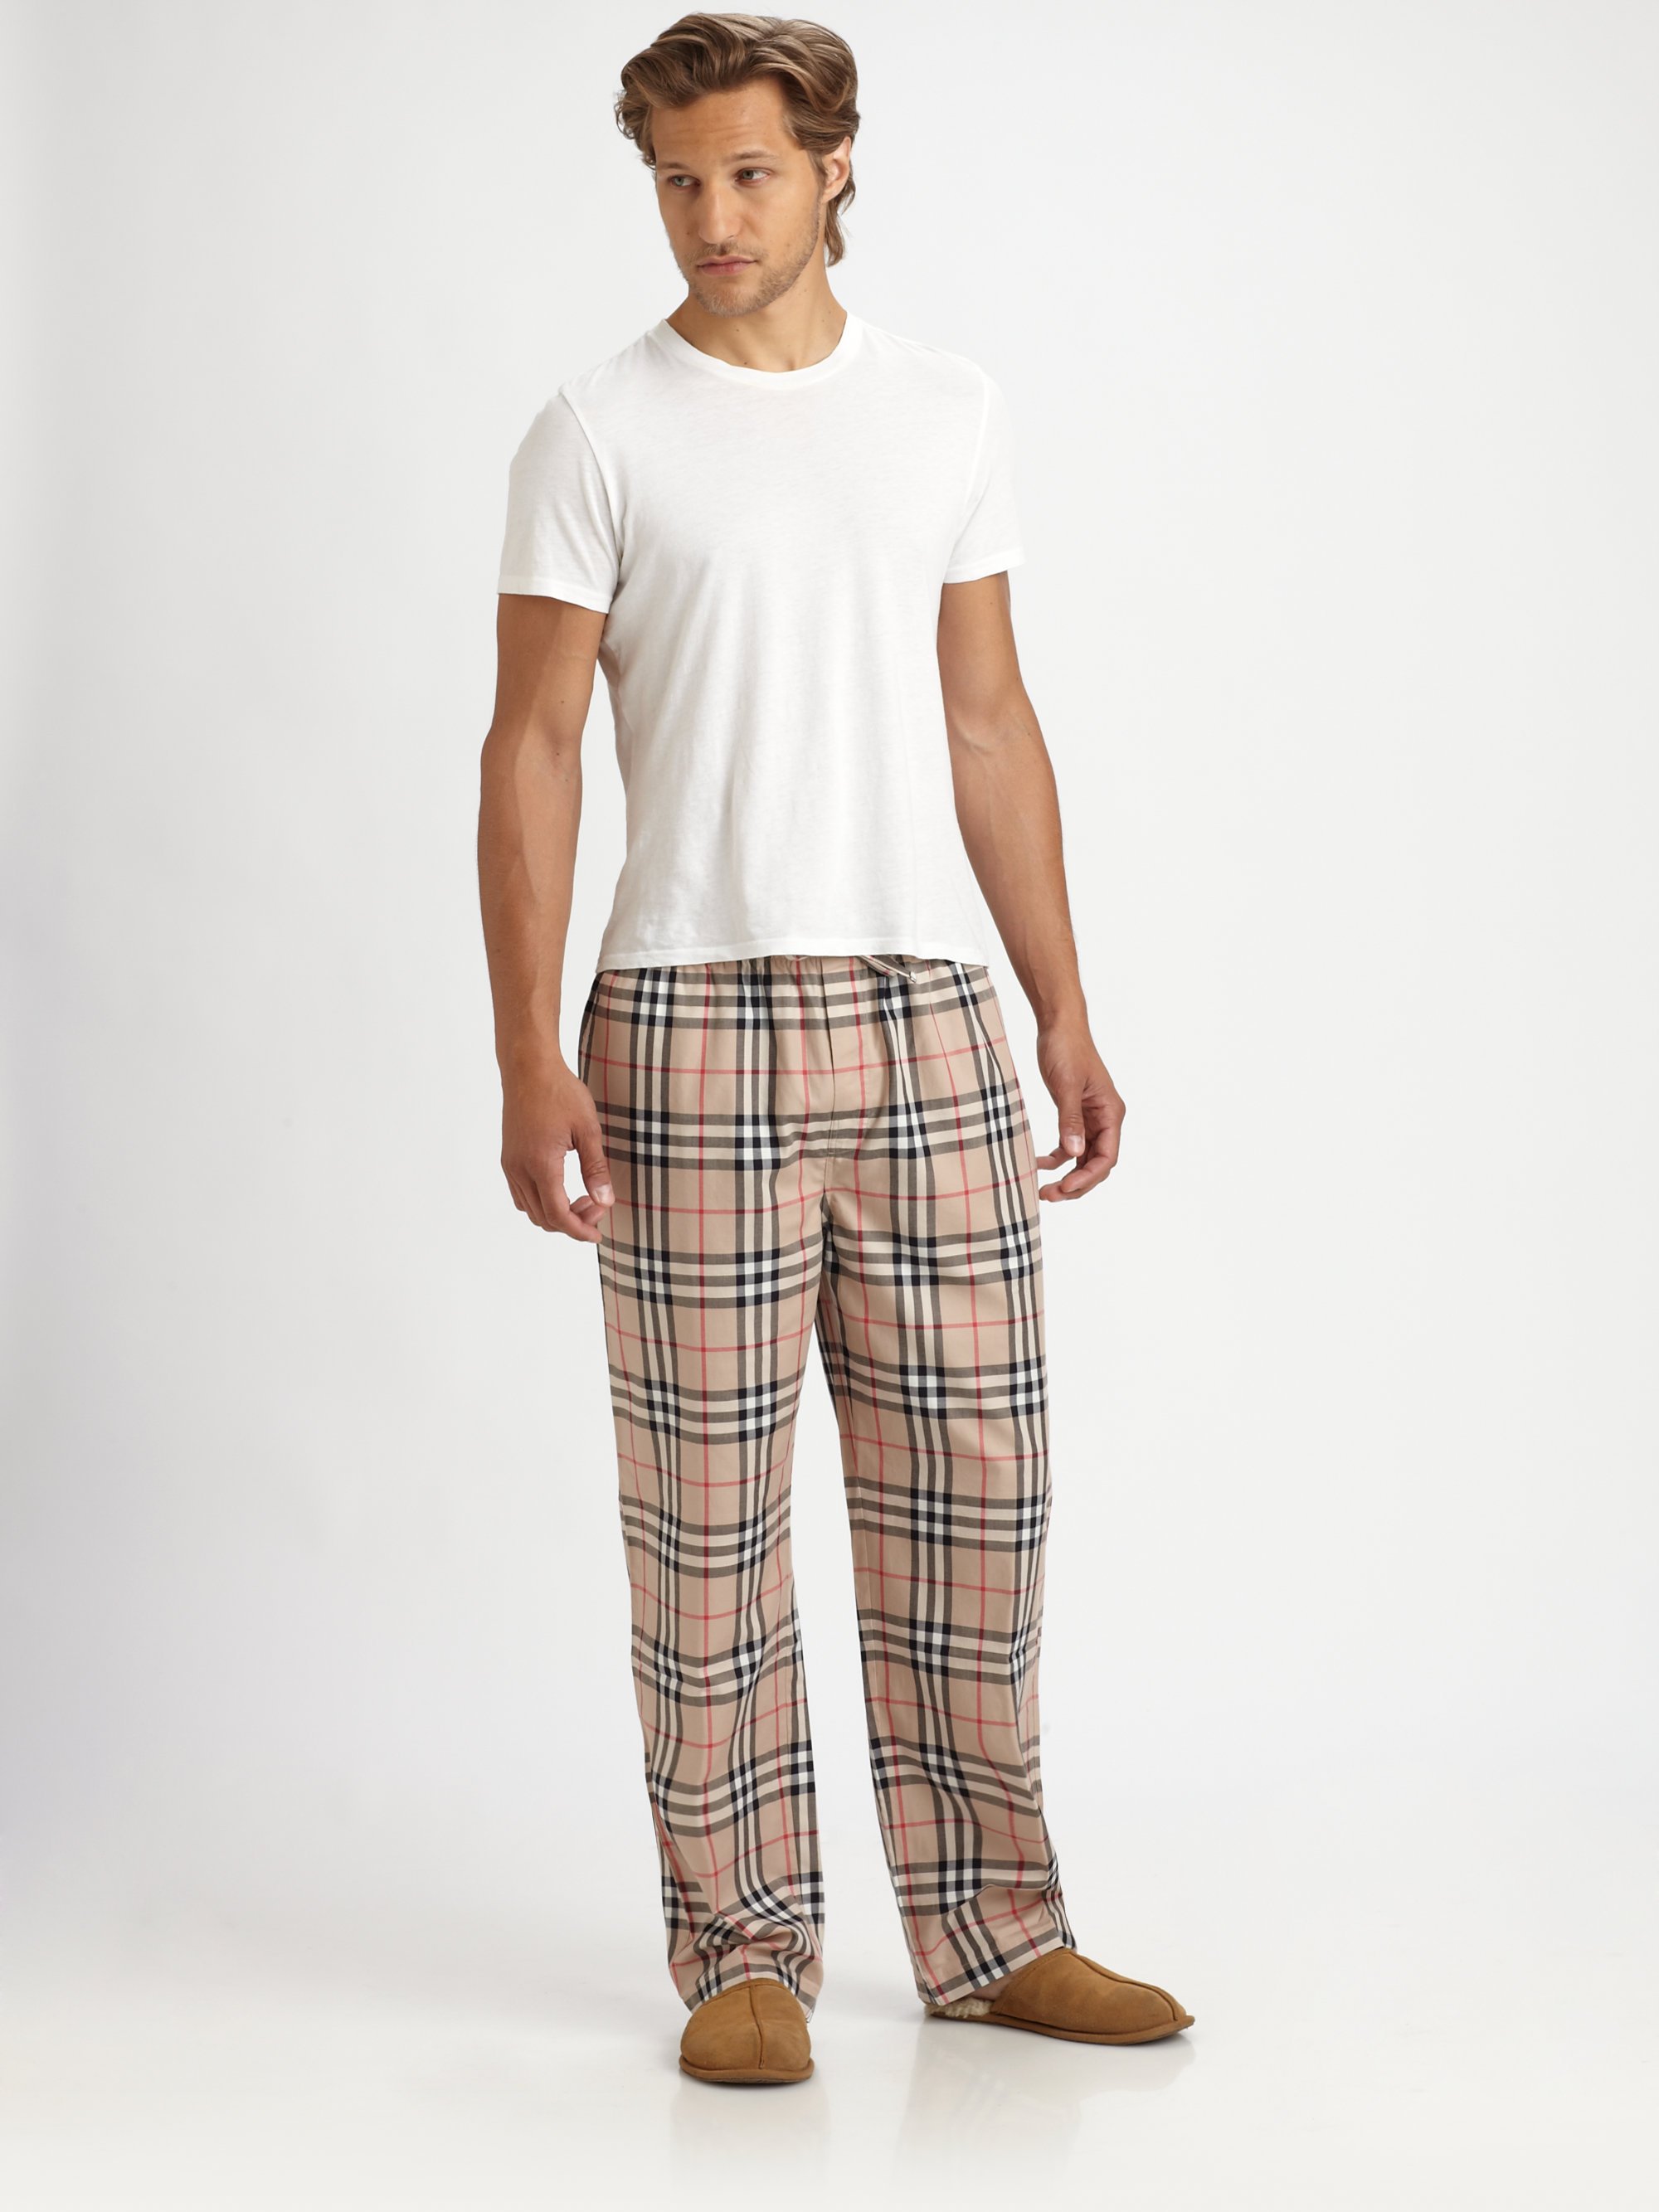 billet Generalife Tradition Burberry Checkprint Pajama Pants in Natural for Men - Lyst